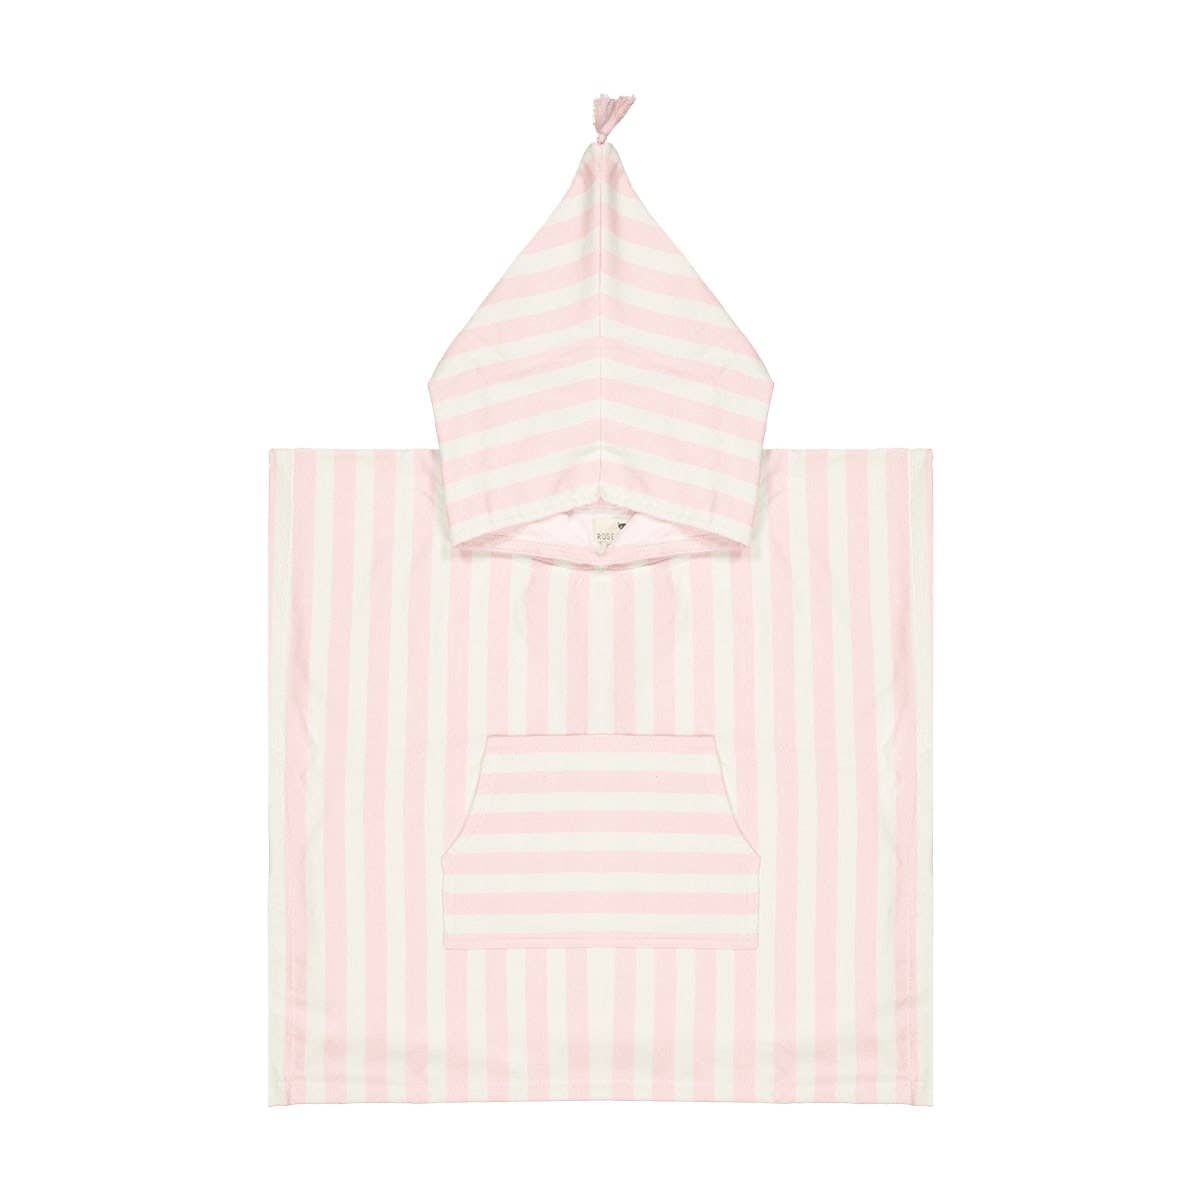 SUZON BATH PONCHO LIGHT PINK 1-3 years (small)